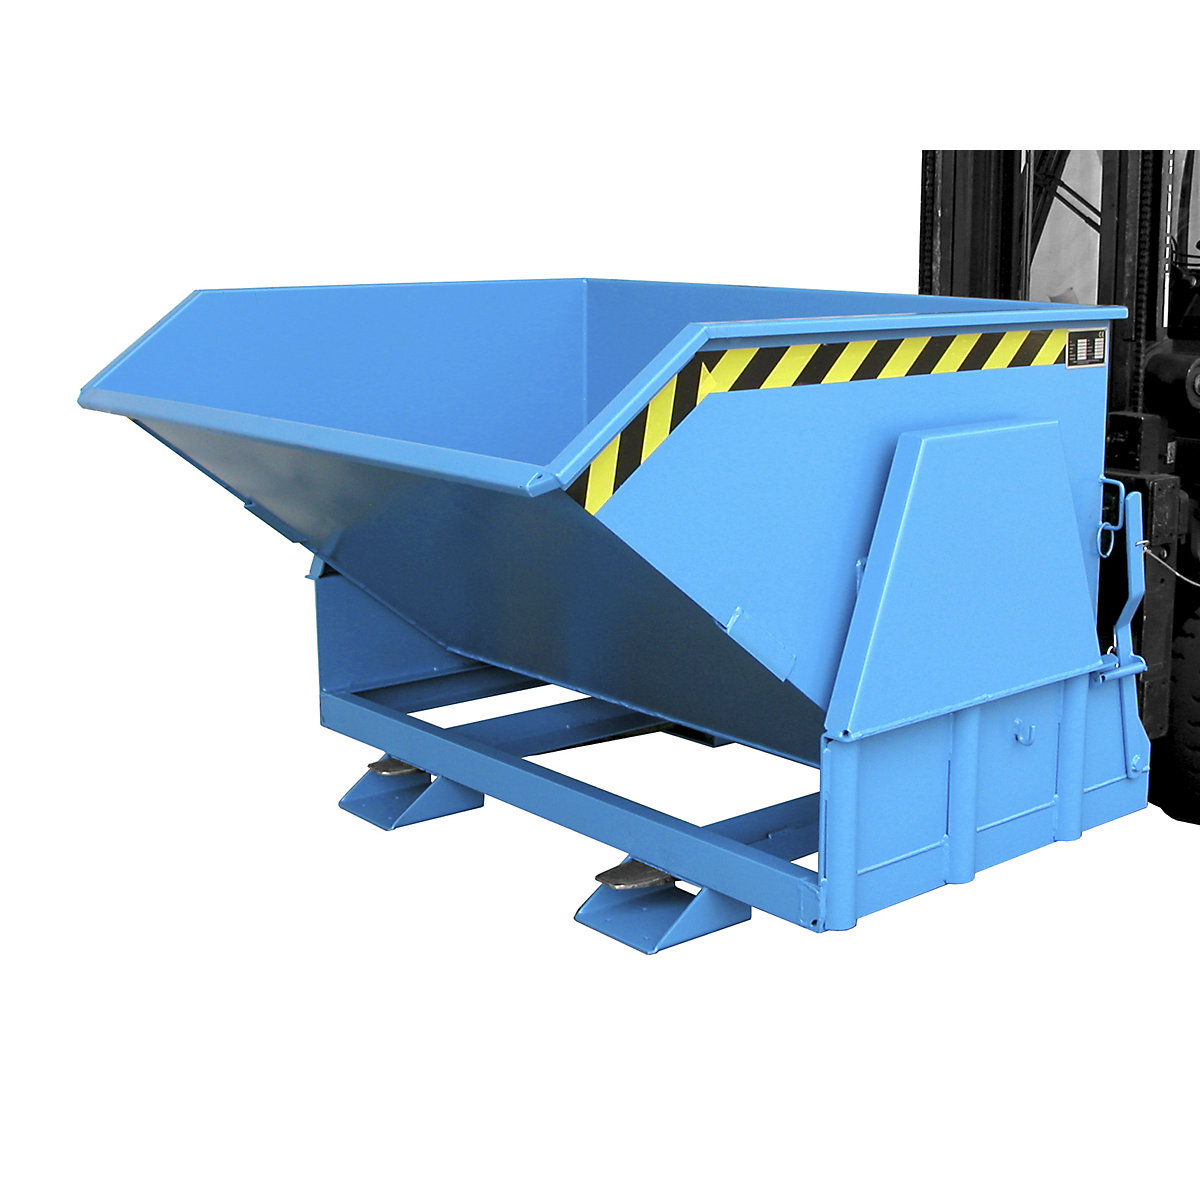 Tilting skip, standard overall height, without wheels – eurokraft pro, capacity 1.2 m³, painted light blue RAL 5012-8